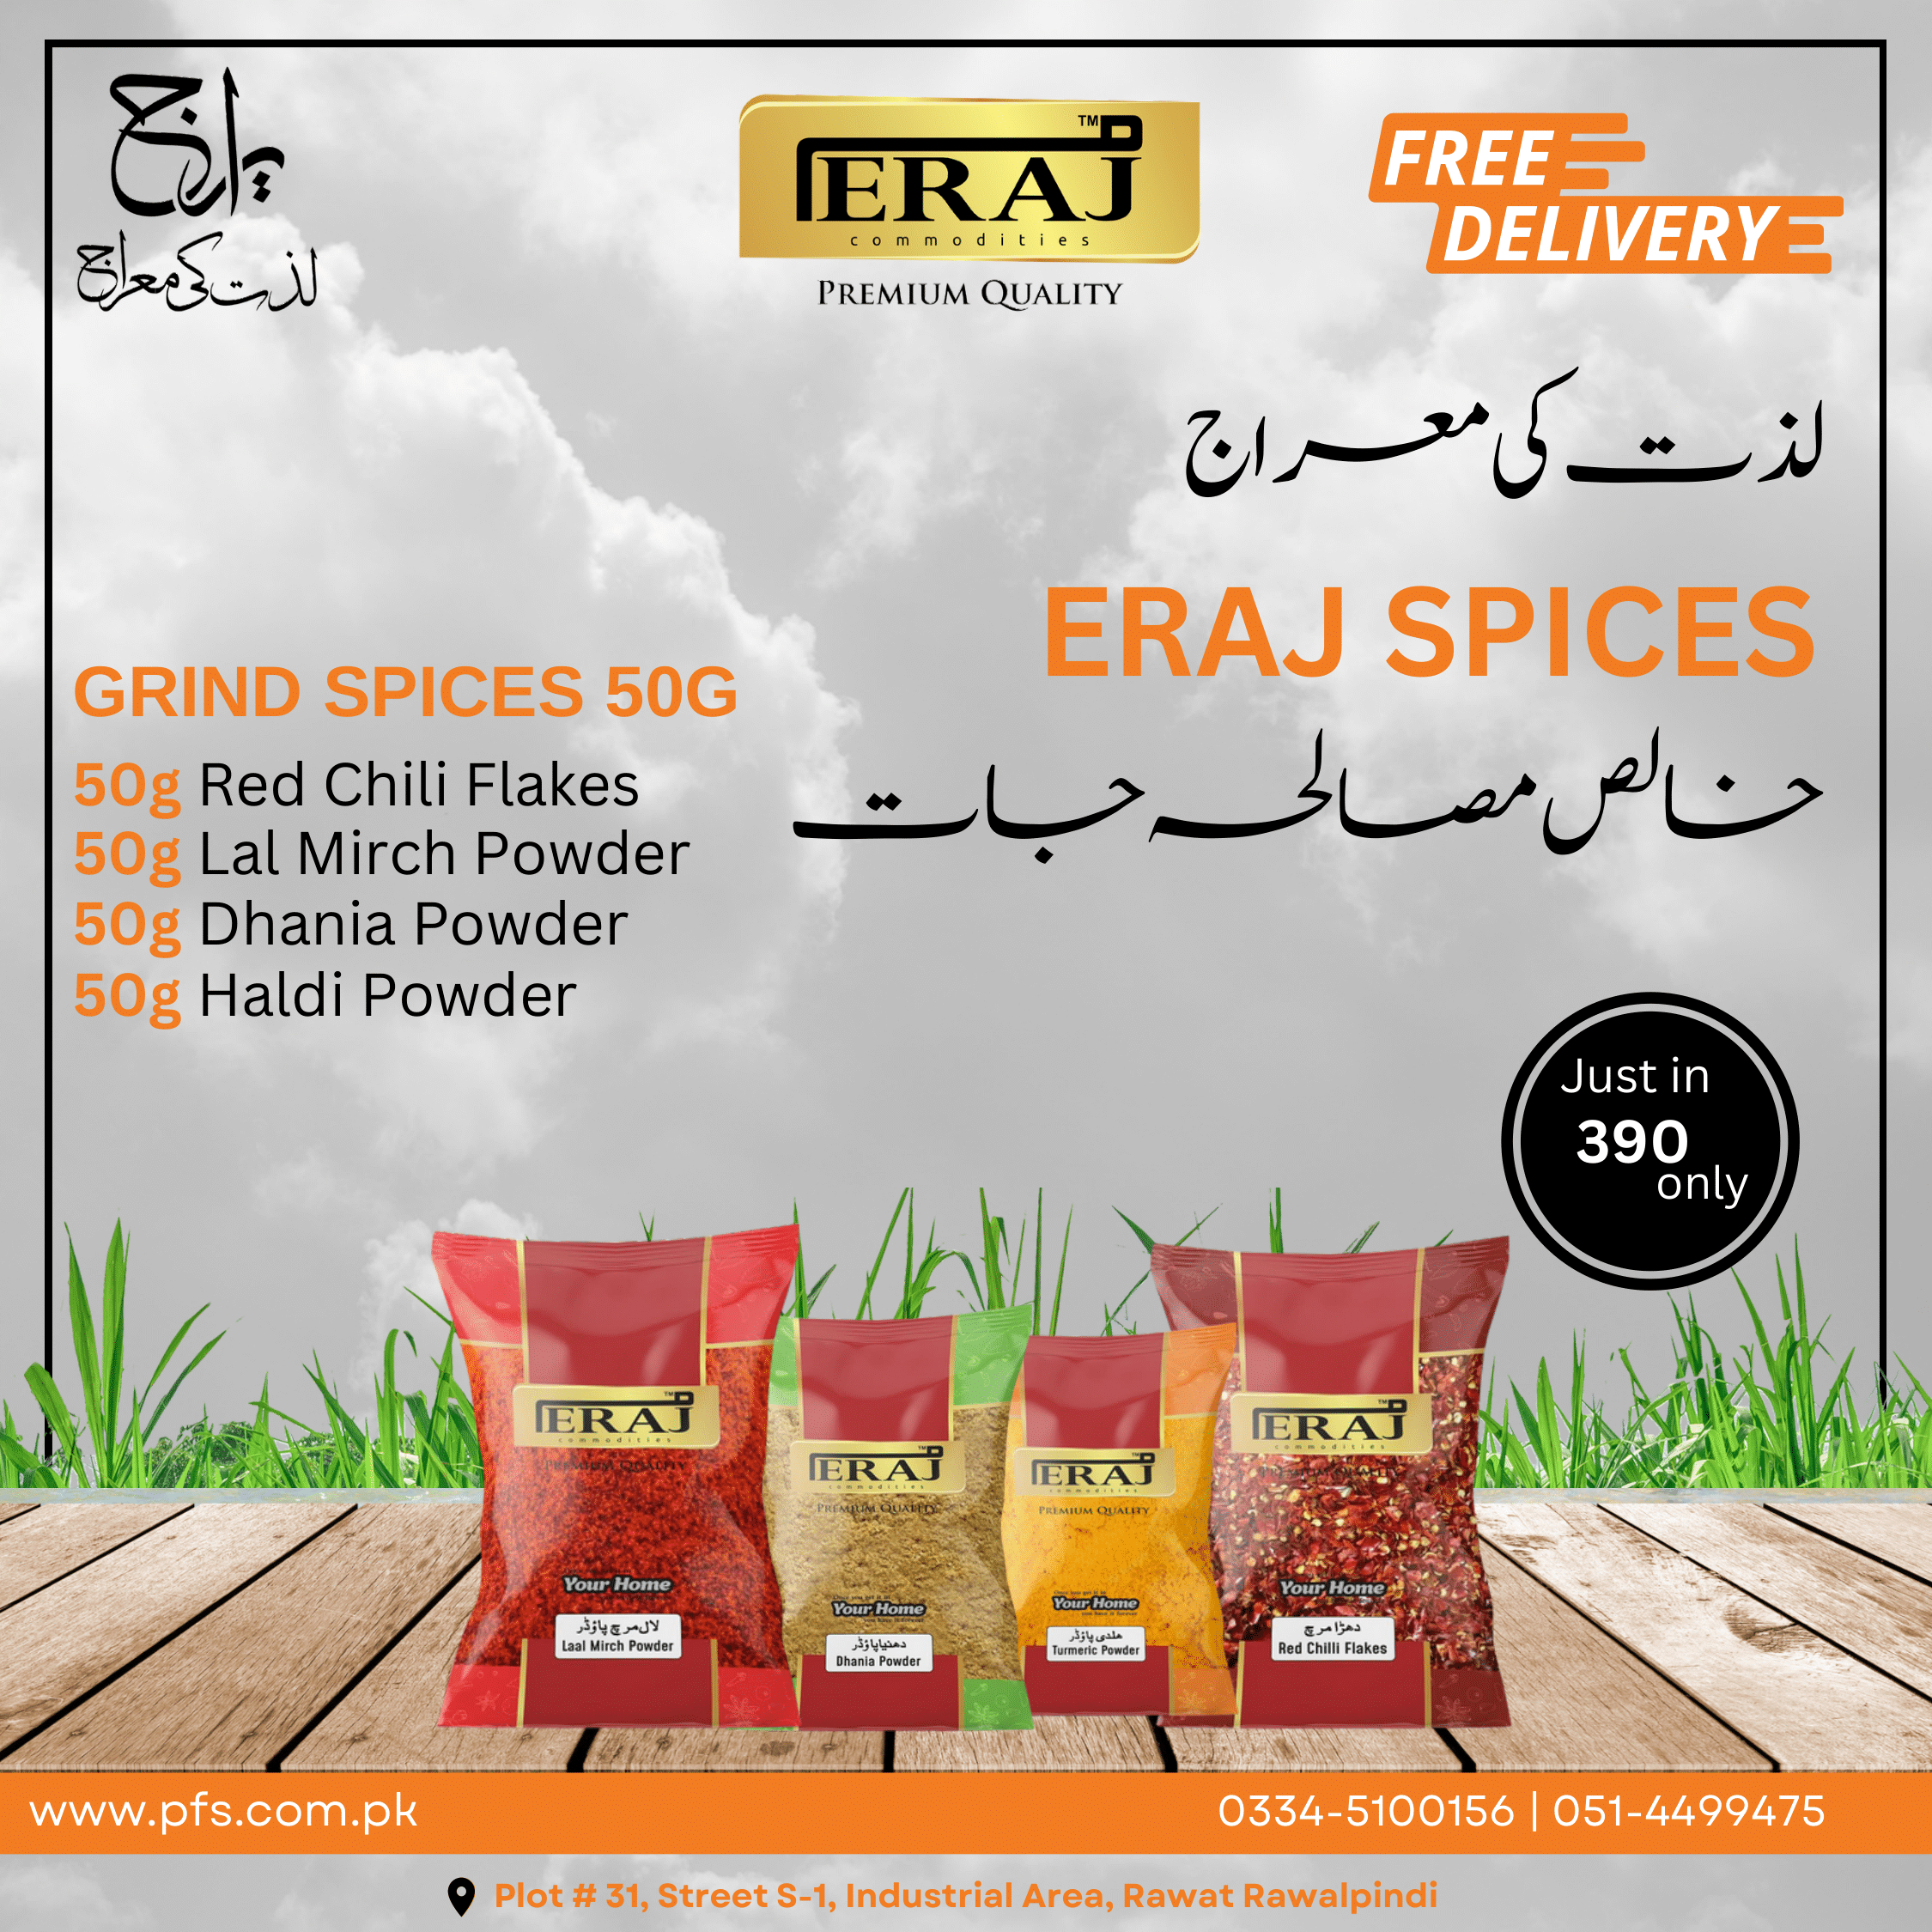 Grind Spices 50g